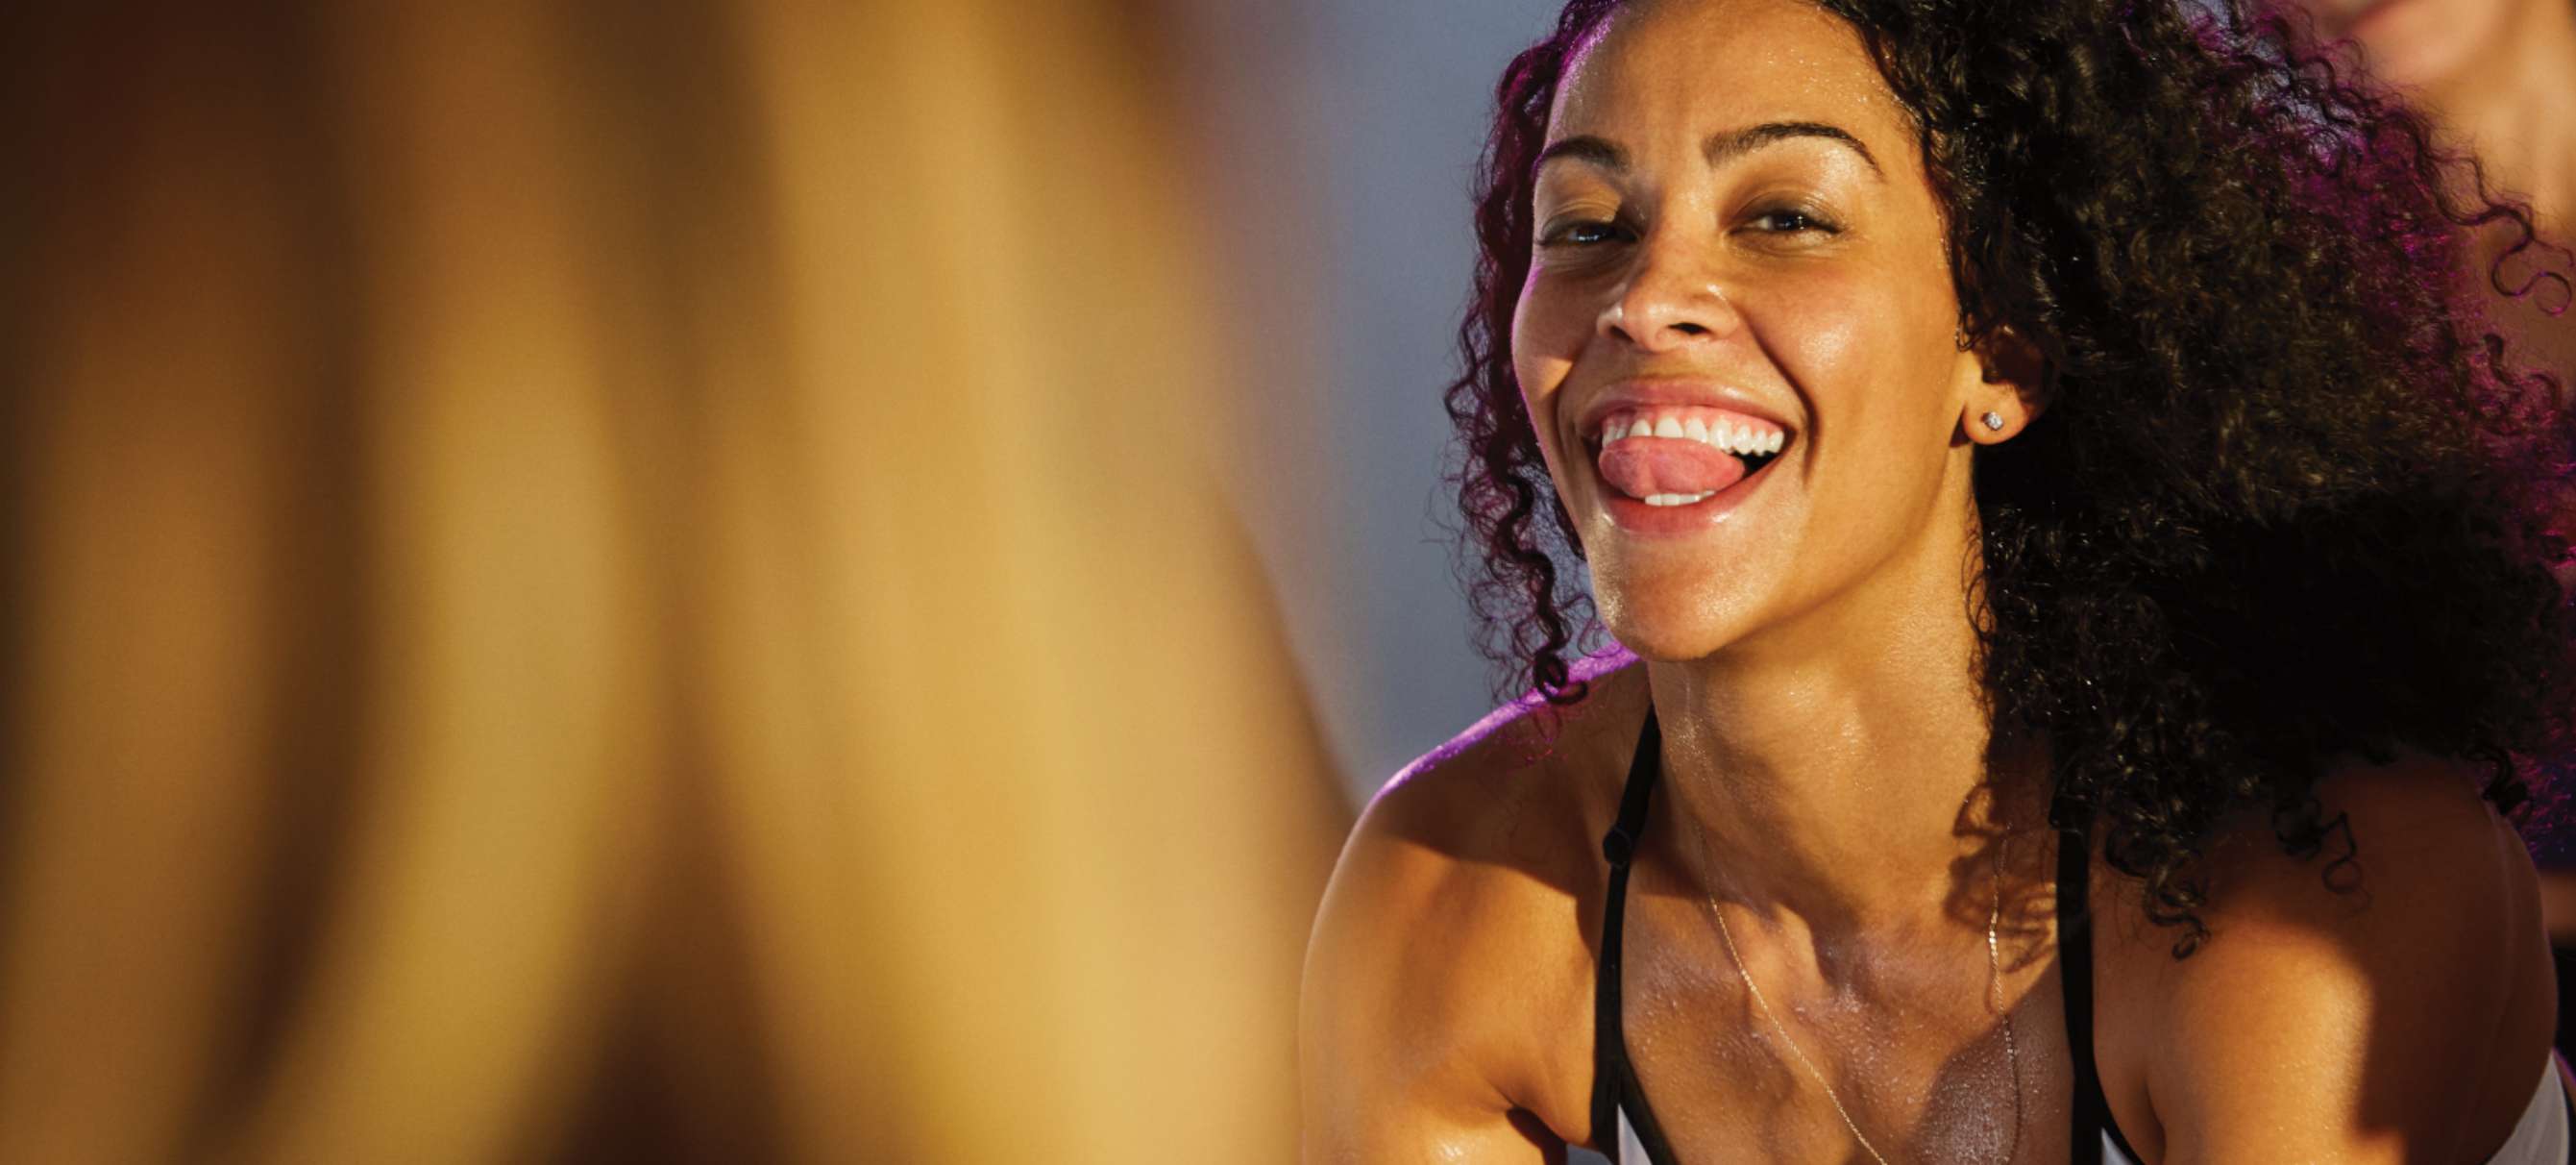 woman smiling while working out